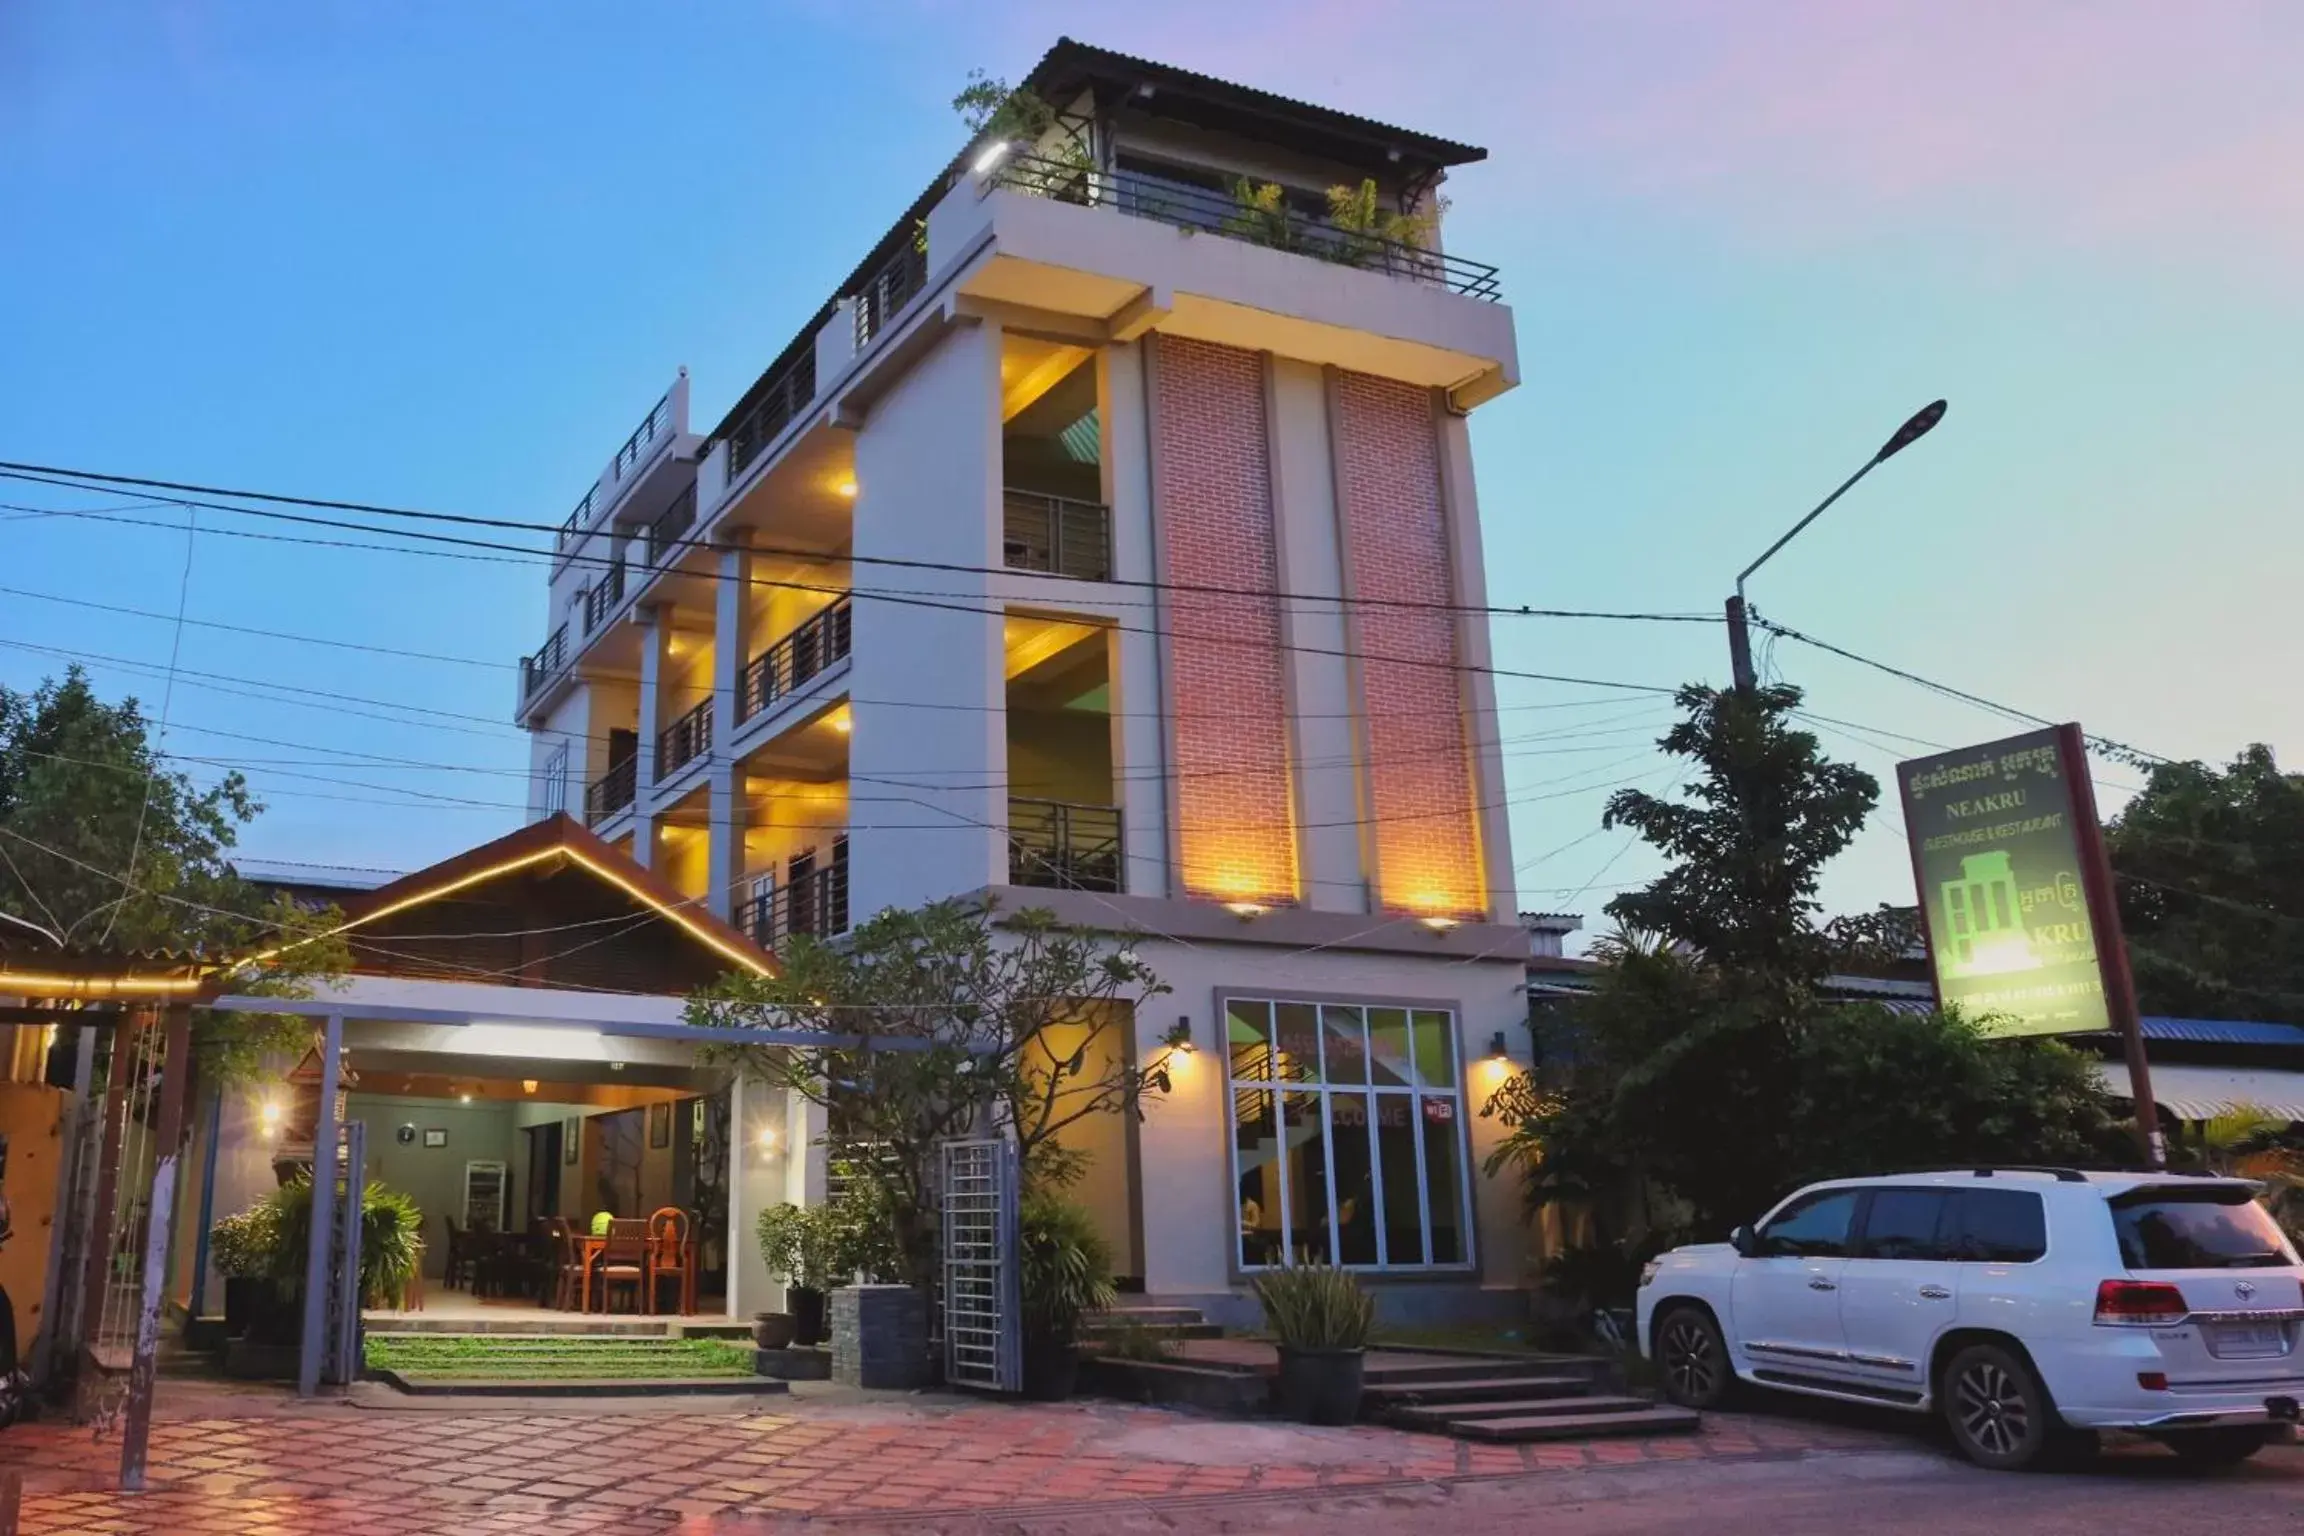 Property Building in Neakru Guesthouse and Restaurant